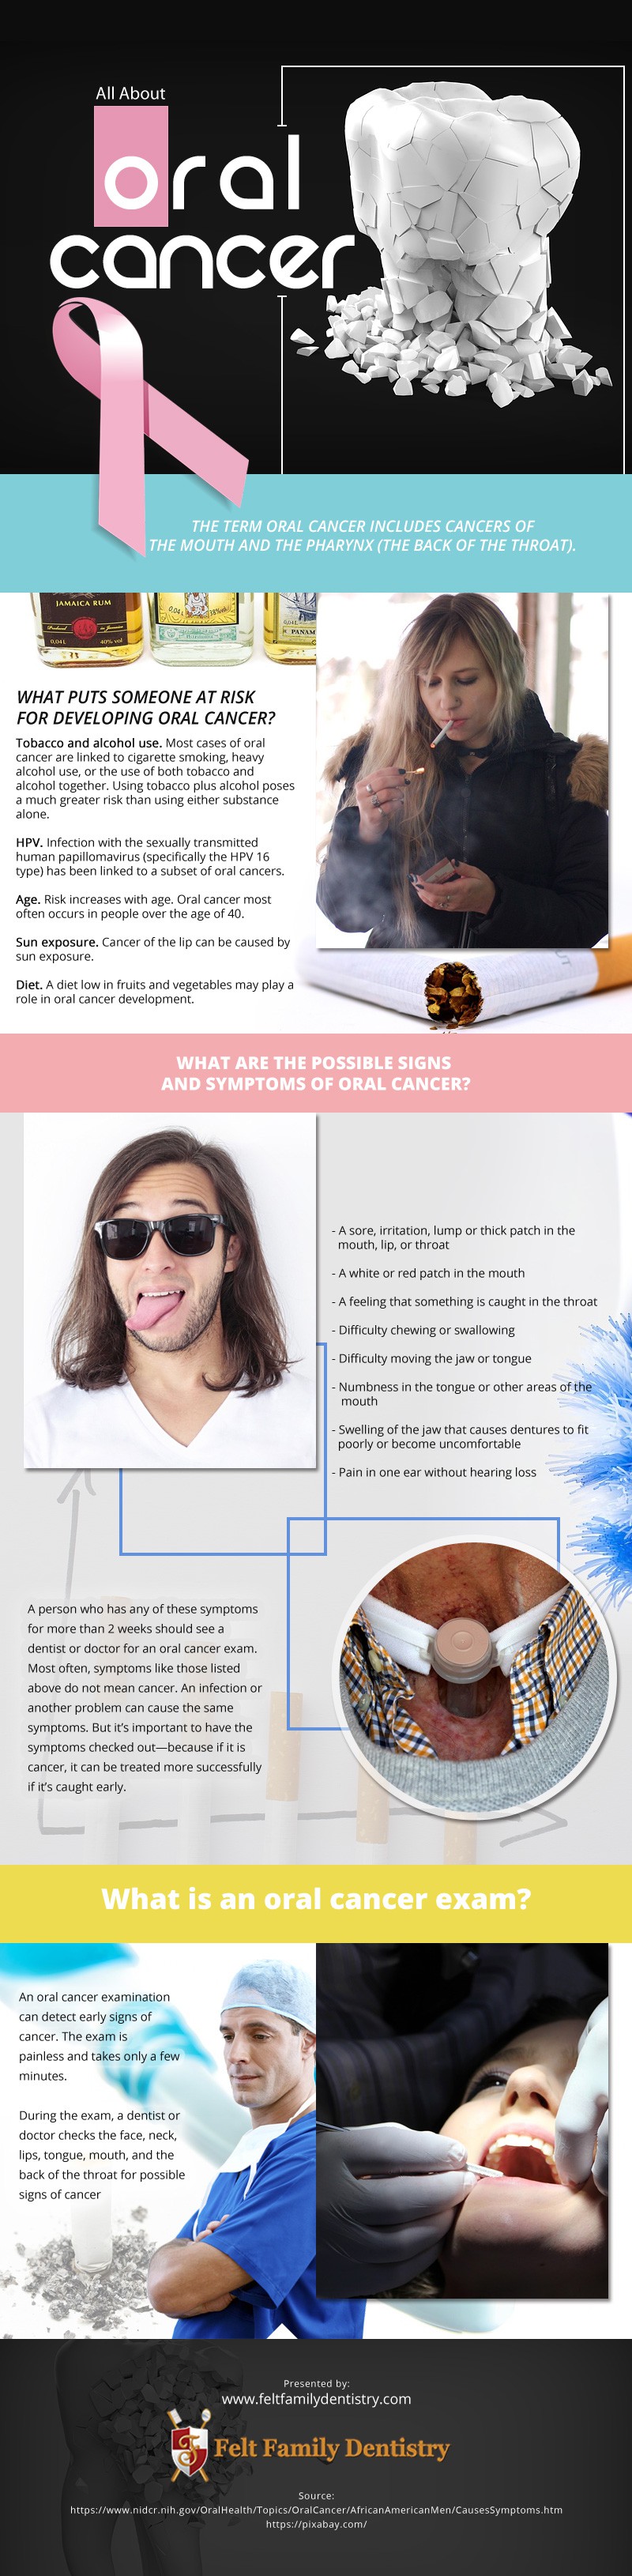 Oral-Cancer Infographic